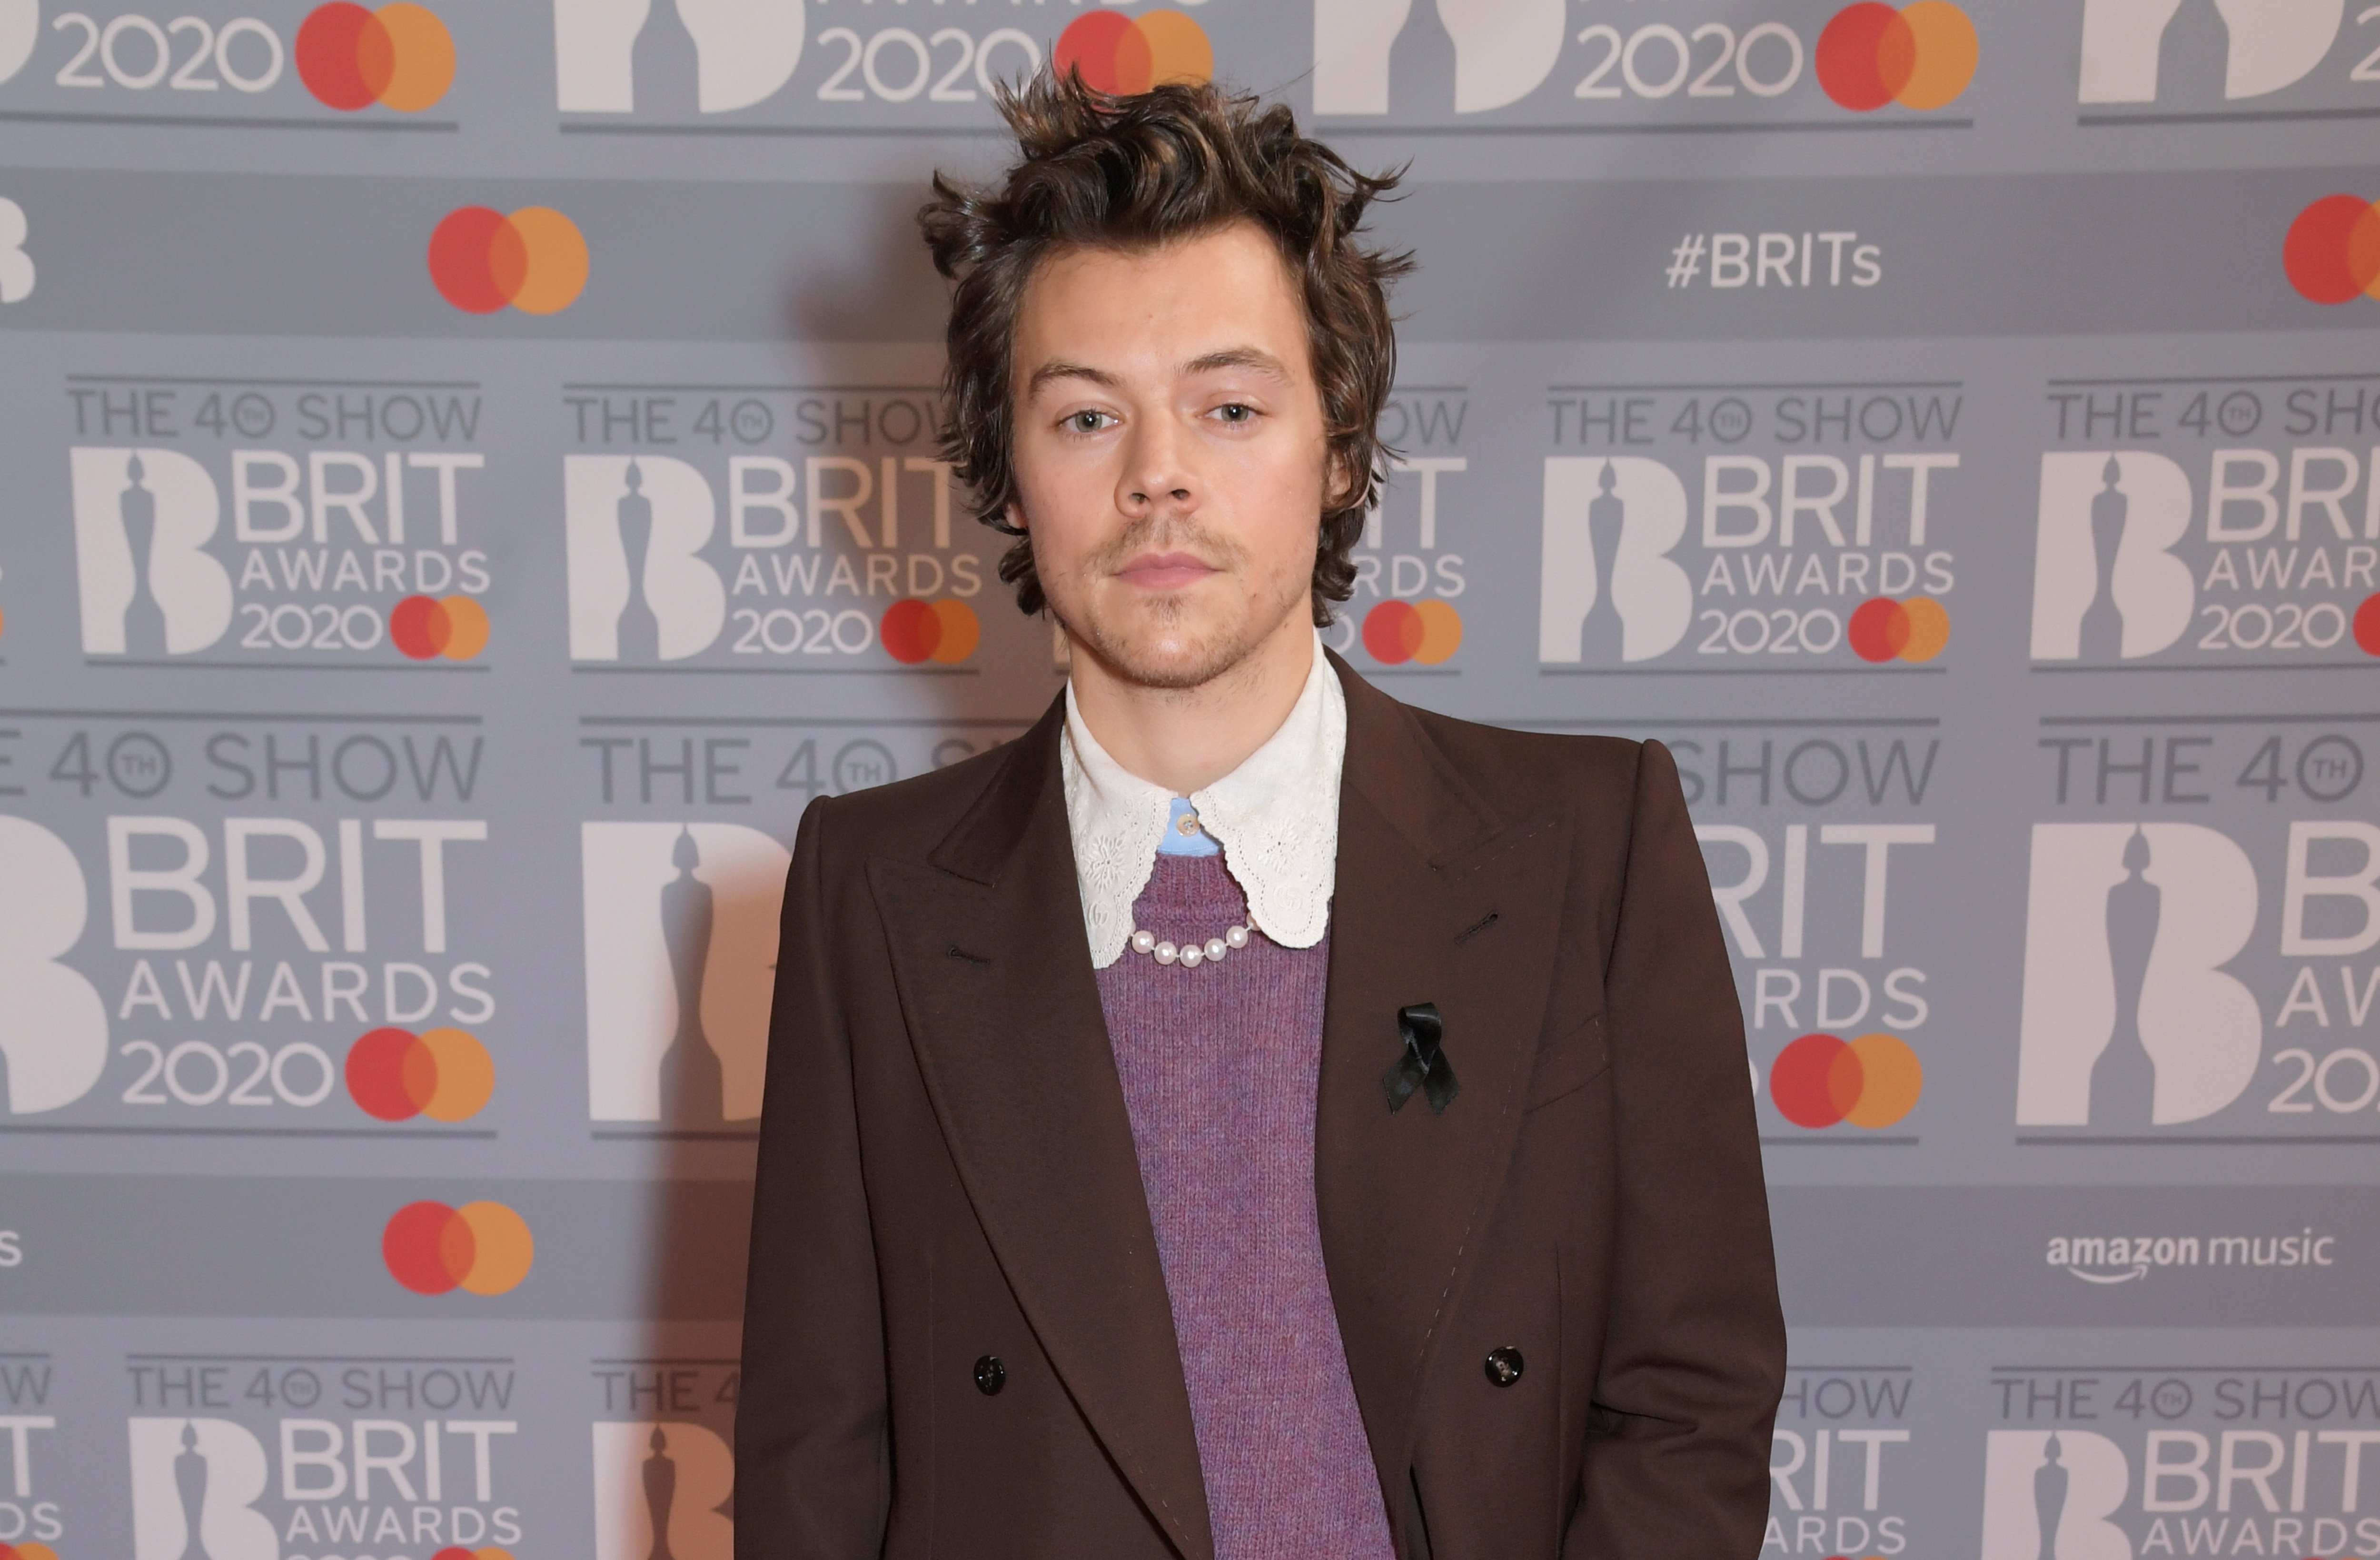 Harry Styles at the 2020 Brit Awards in London, England on February 18, 2020. | Photo: Getty Images